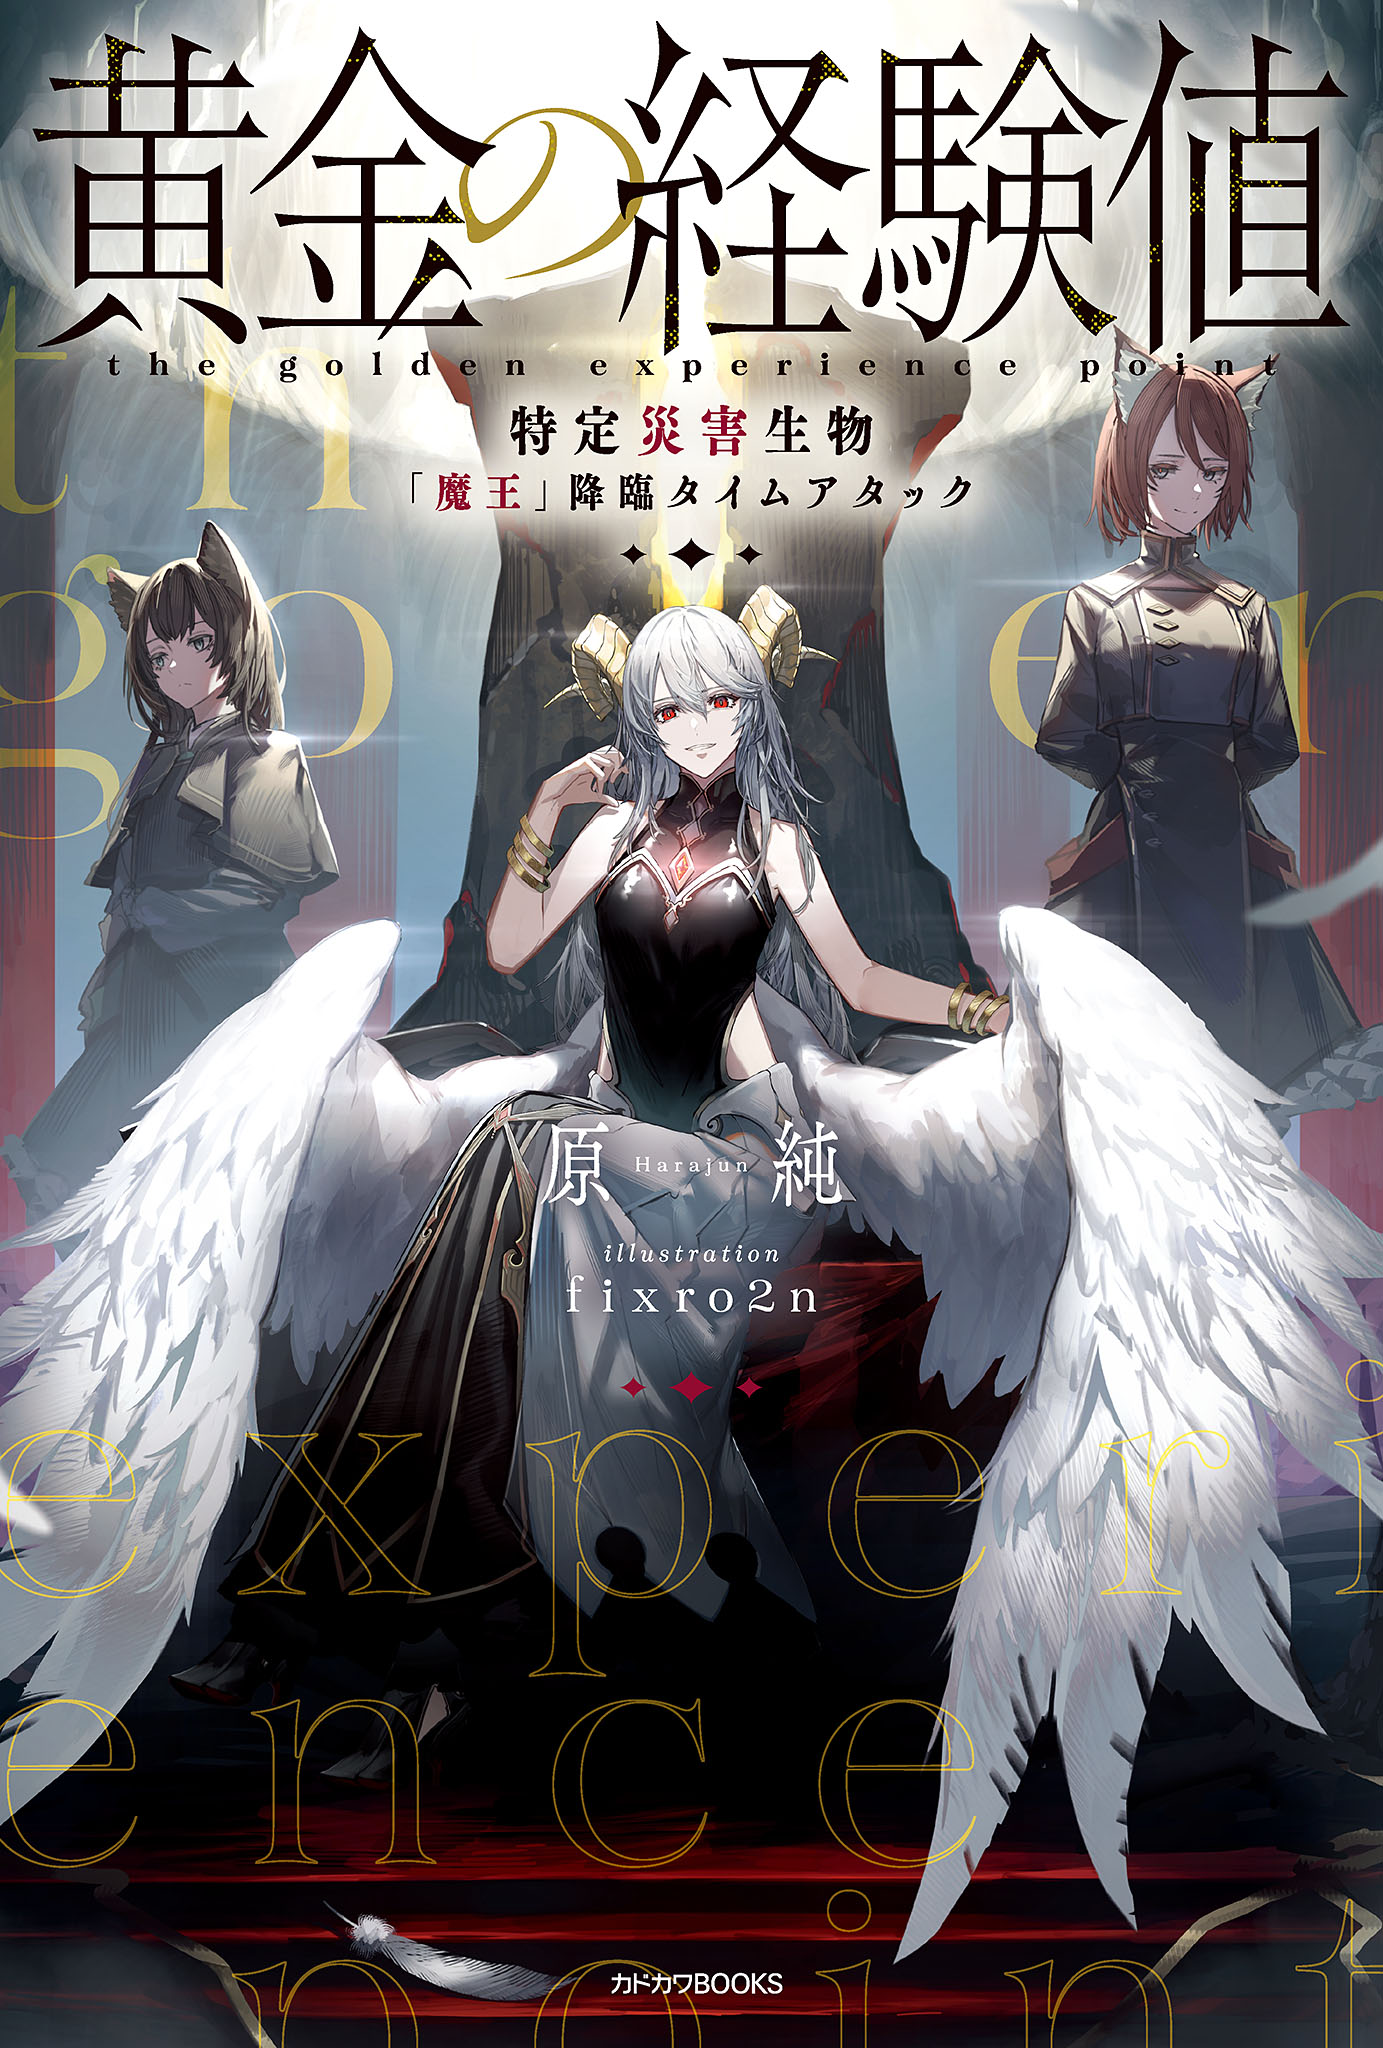 Download Experience dark themes in the anime series 'Angels Of